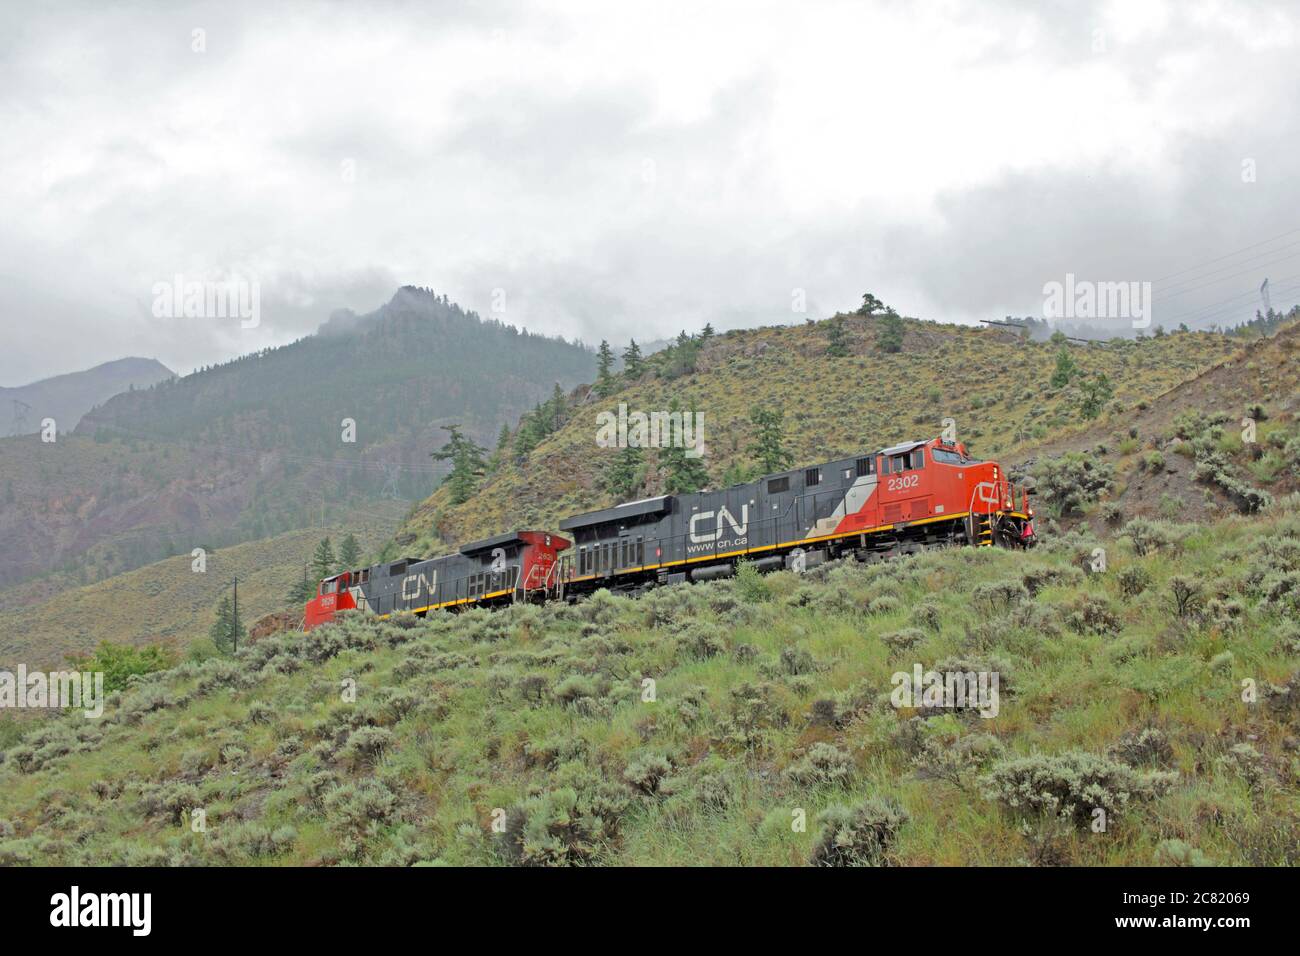 CN Canadian National rail train Engine, Fountain Valley, vicino a Lillooet, British Columbia, Canada Foto Stock